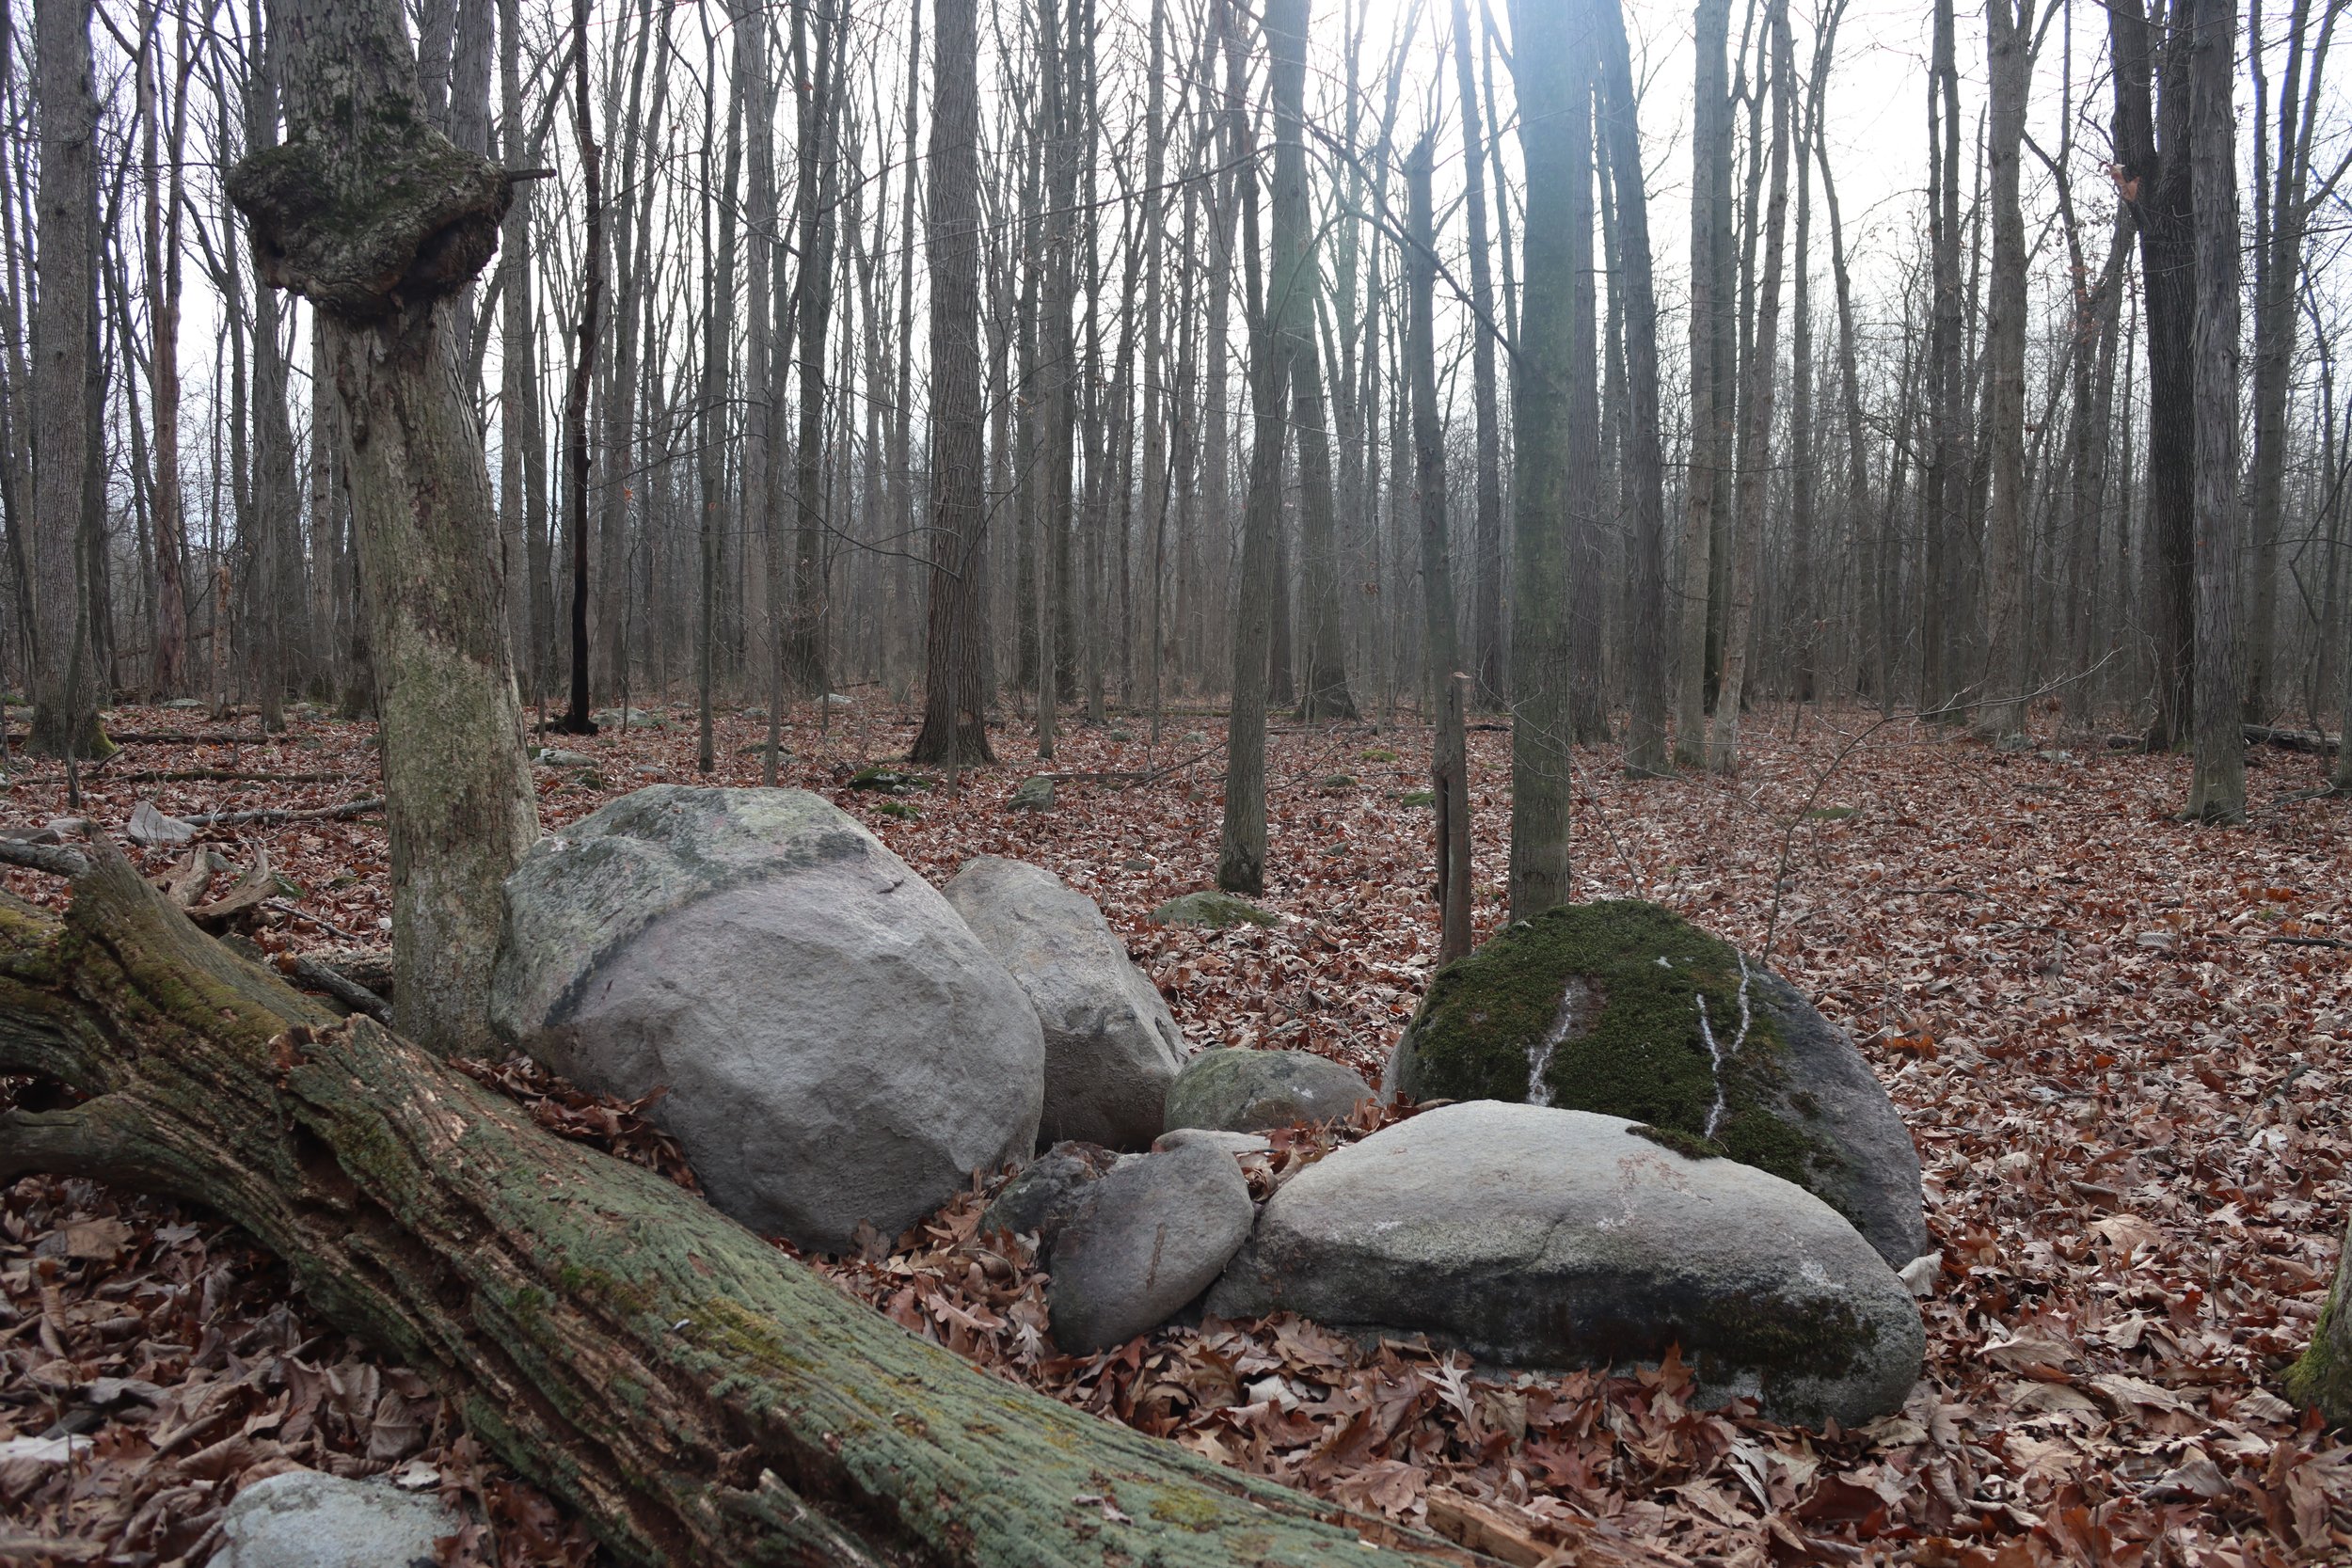 Large rocks on the forest floor during winter